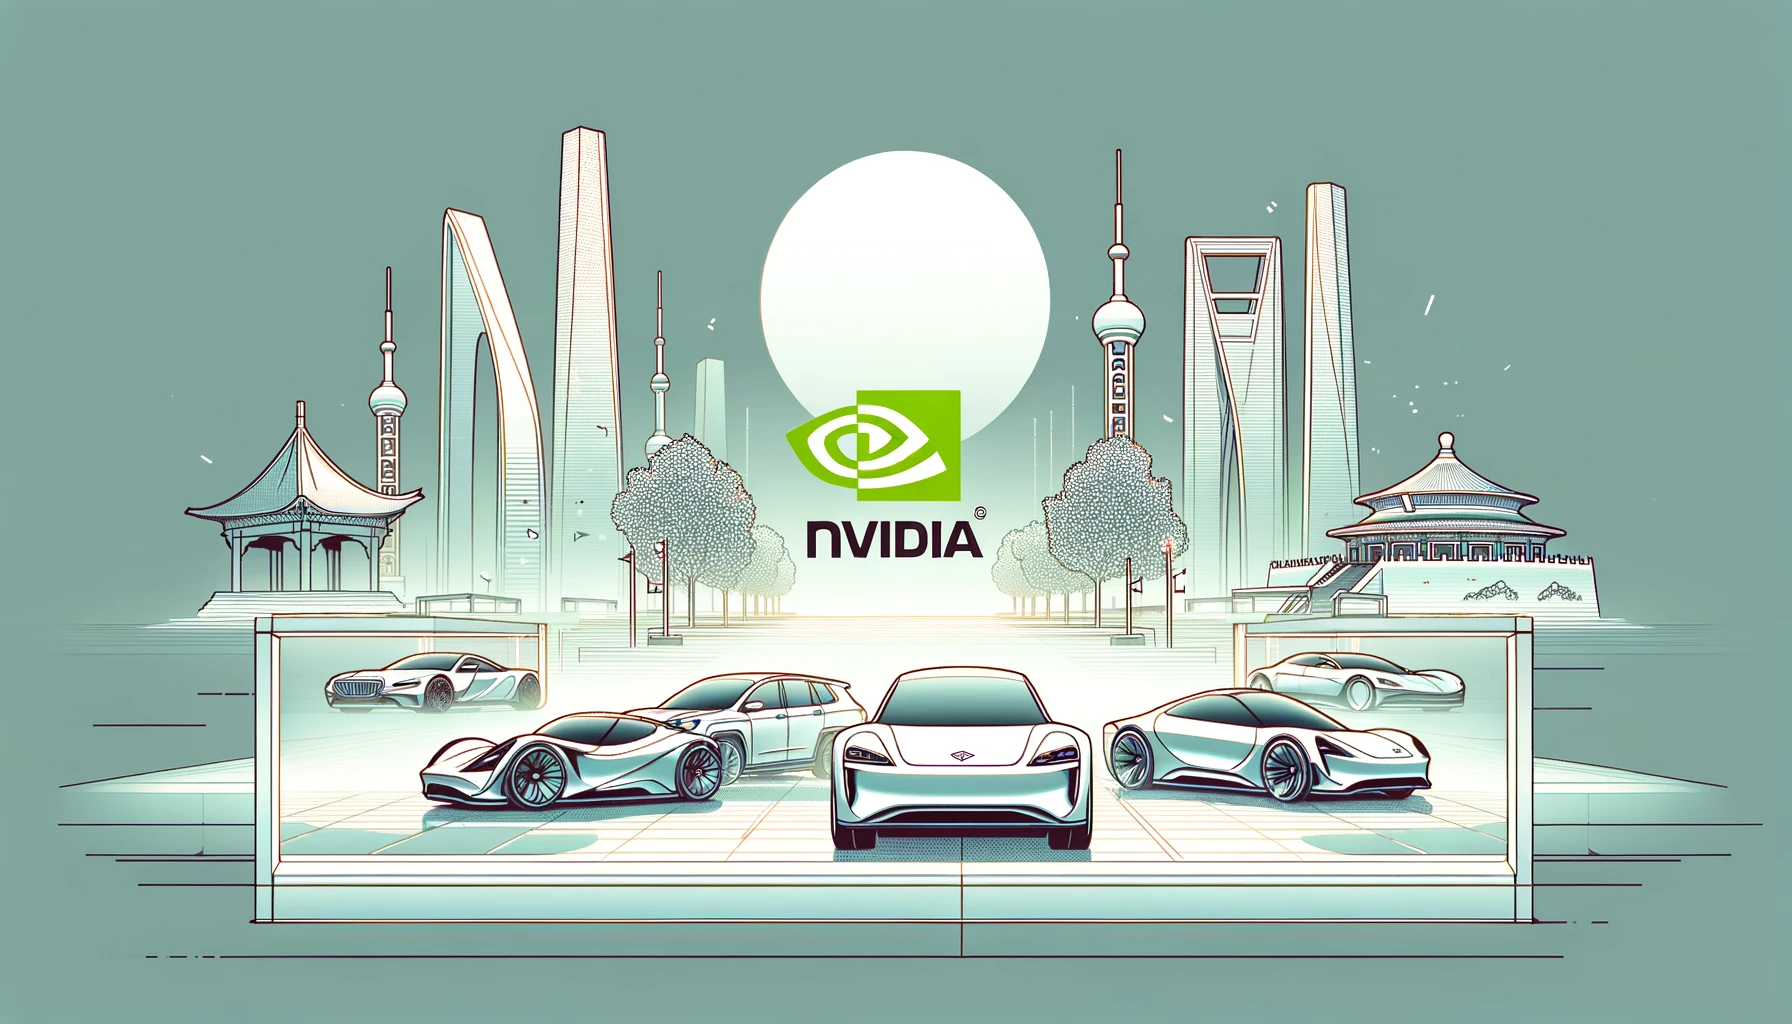 Nvidia boosts partnerships with Chinese EV firms as auto AI competition intensifies.